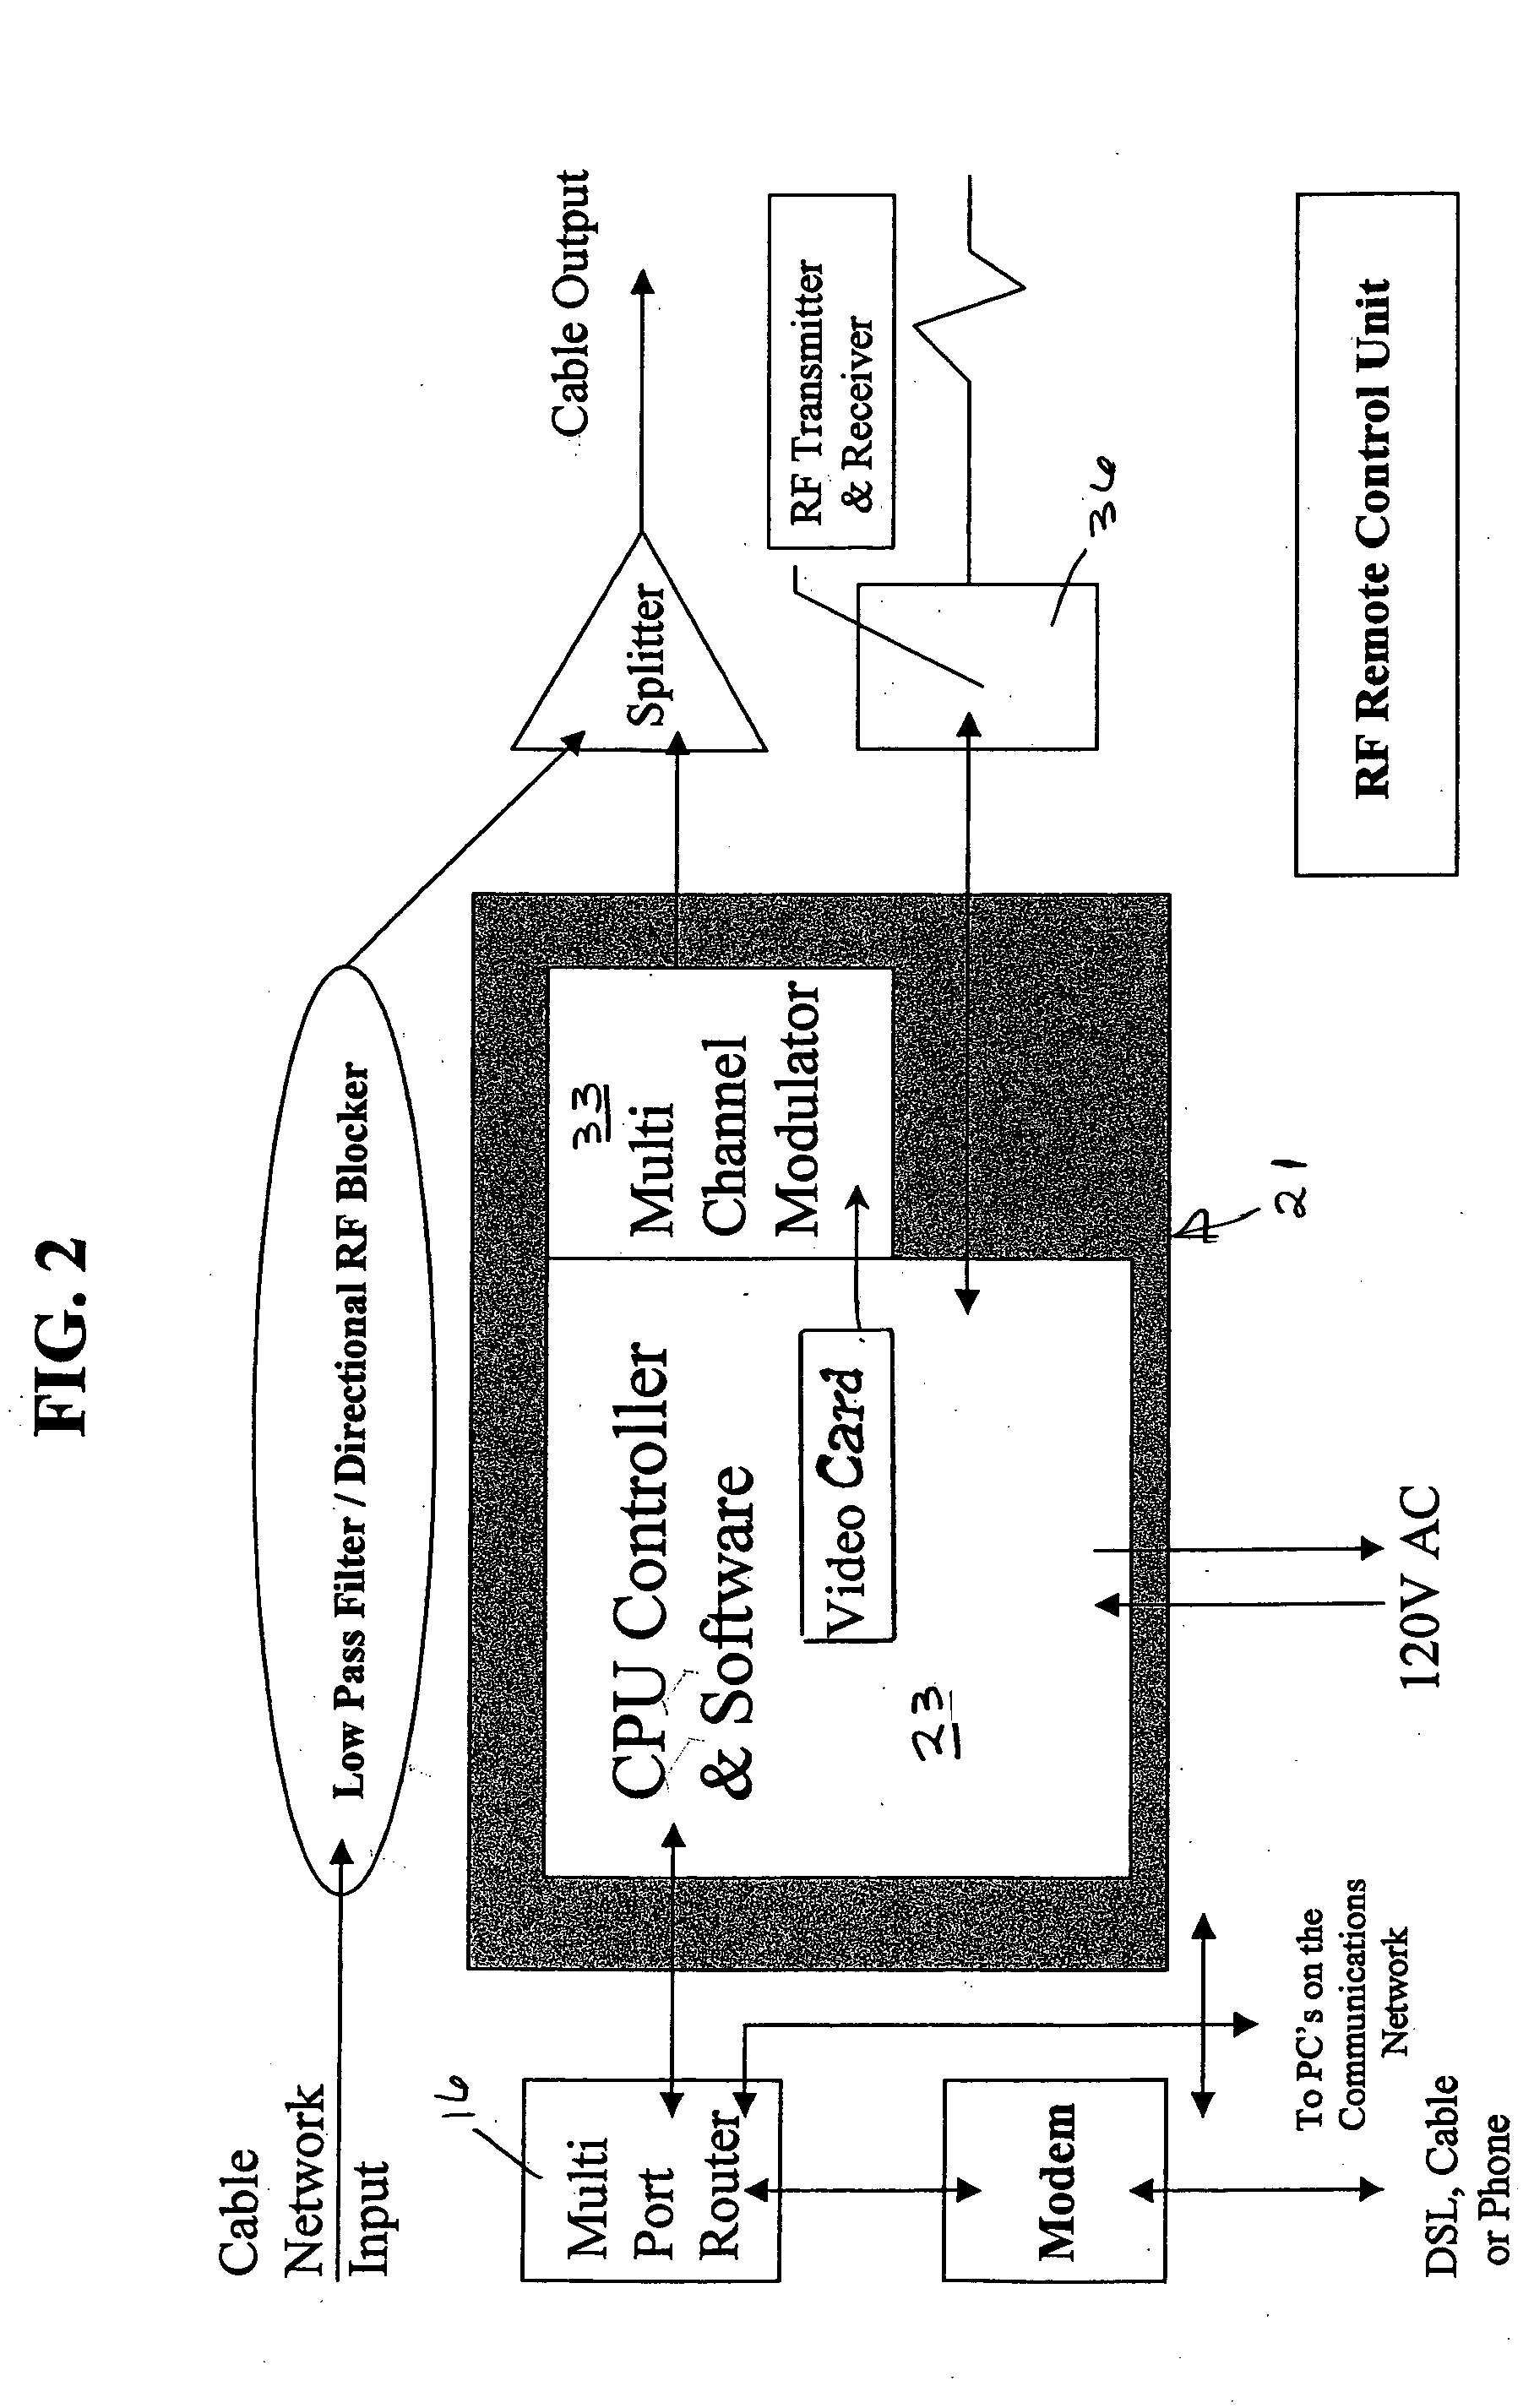 Method and apparatus for controlling child's internet use